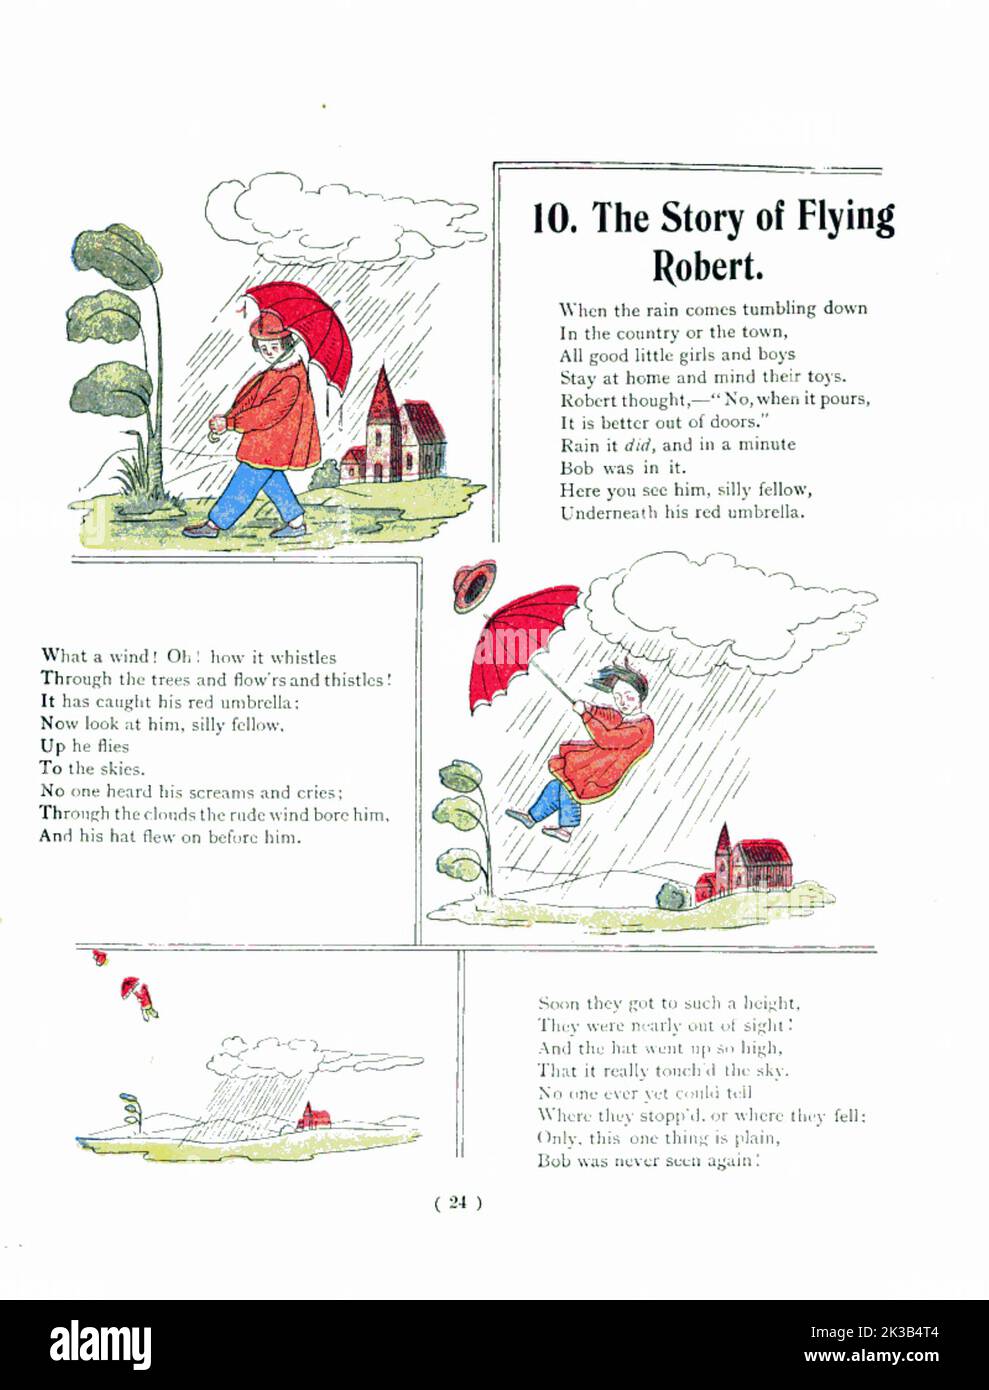 The Story of Flying Robert from ' The Struwwelpeter painting book ' Pretty Stories and Funny Pictures for Little Children by Heinrich Hoffmann Published in London in 1900 Stock Photo